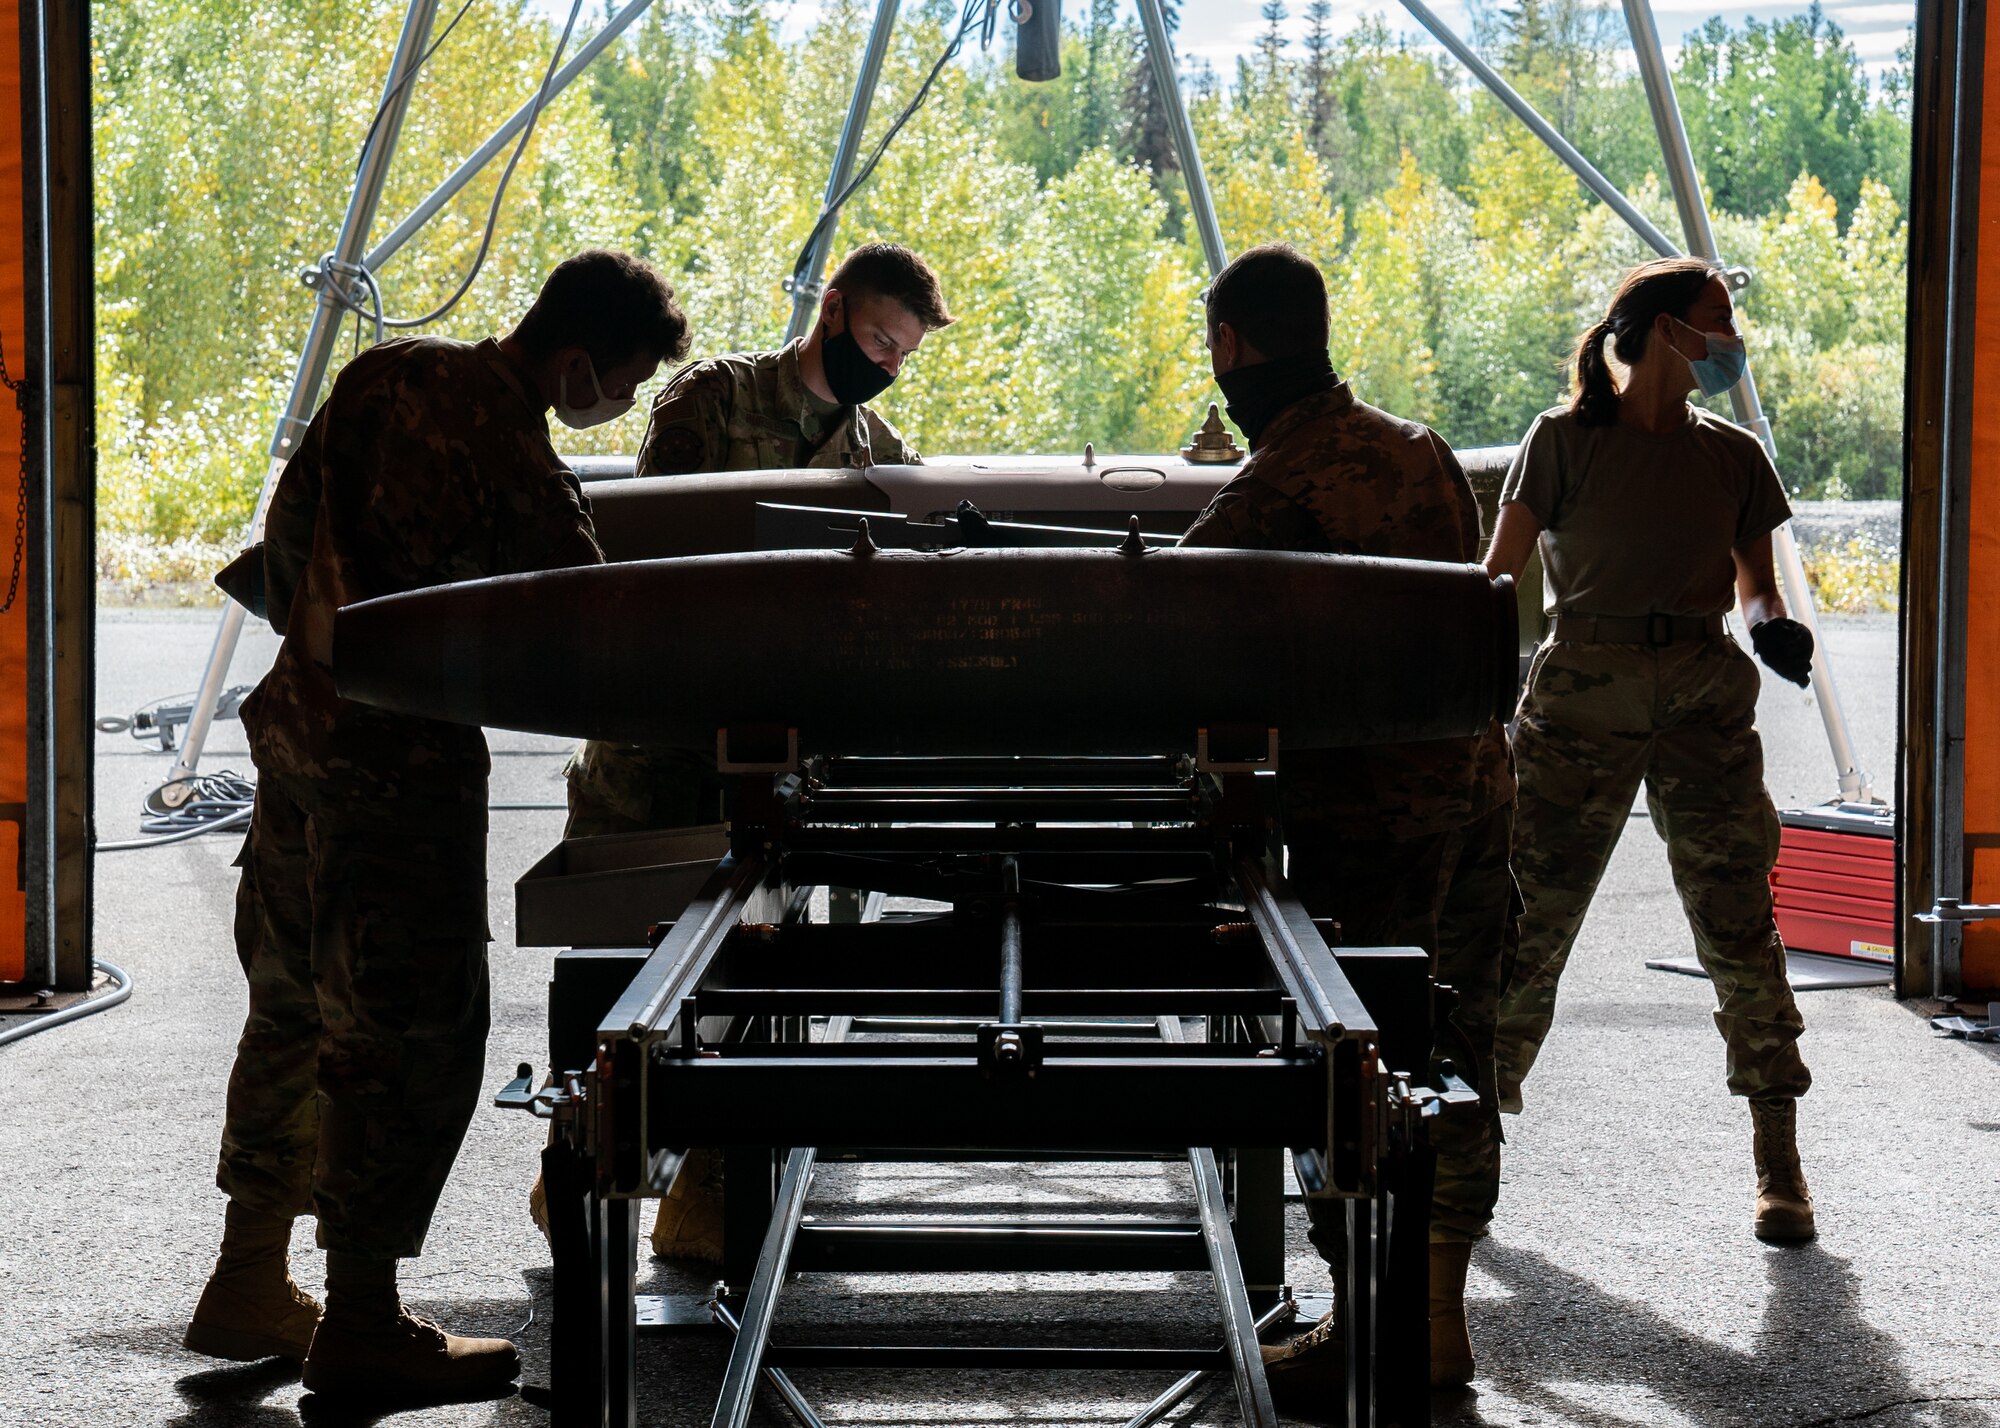 U.S. Air Force Airmen assigned to the 3rd Munitions Squadron demonstrate their bomb building capabilities during a 3rd Wing immersion tour at Joint Base Elmendorf-Richardson, Alaska.